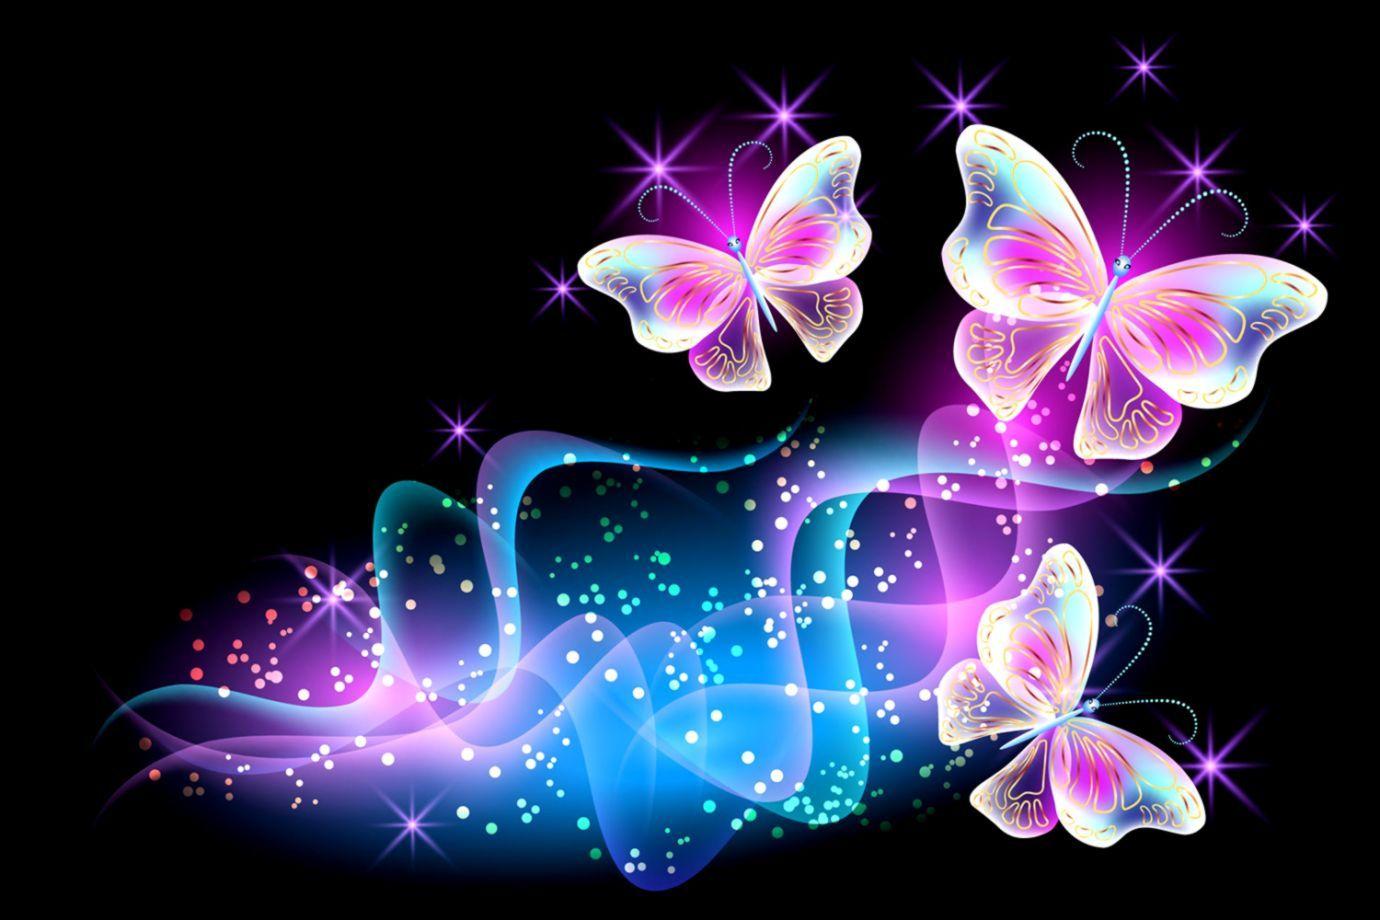 Discover more than 54 wallpaper pink butterfly best - in.cdgdbentre